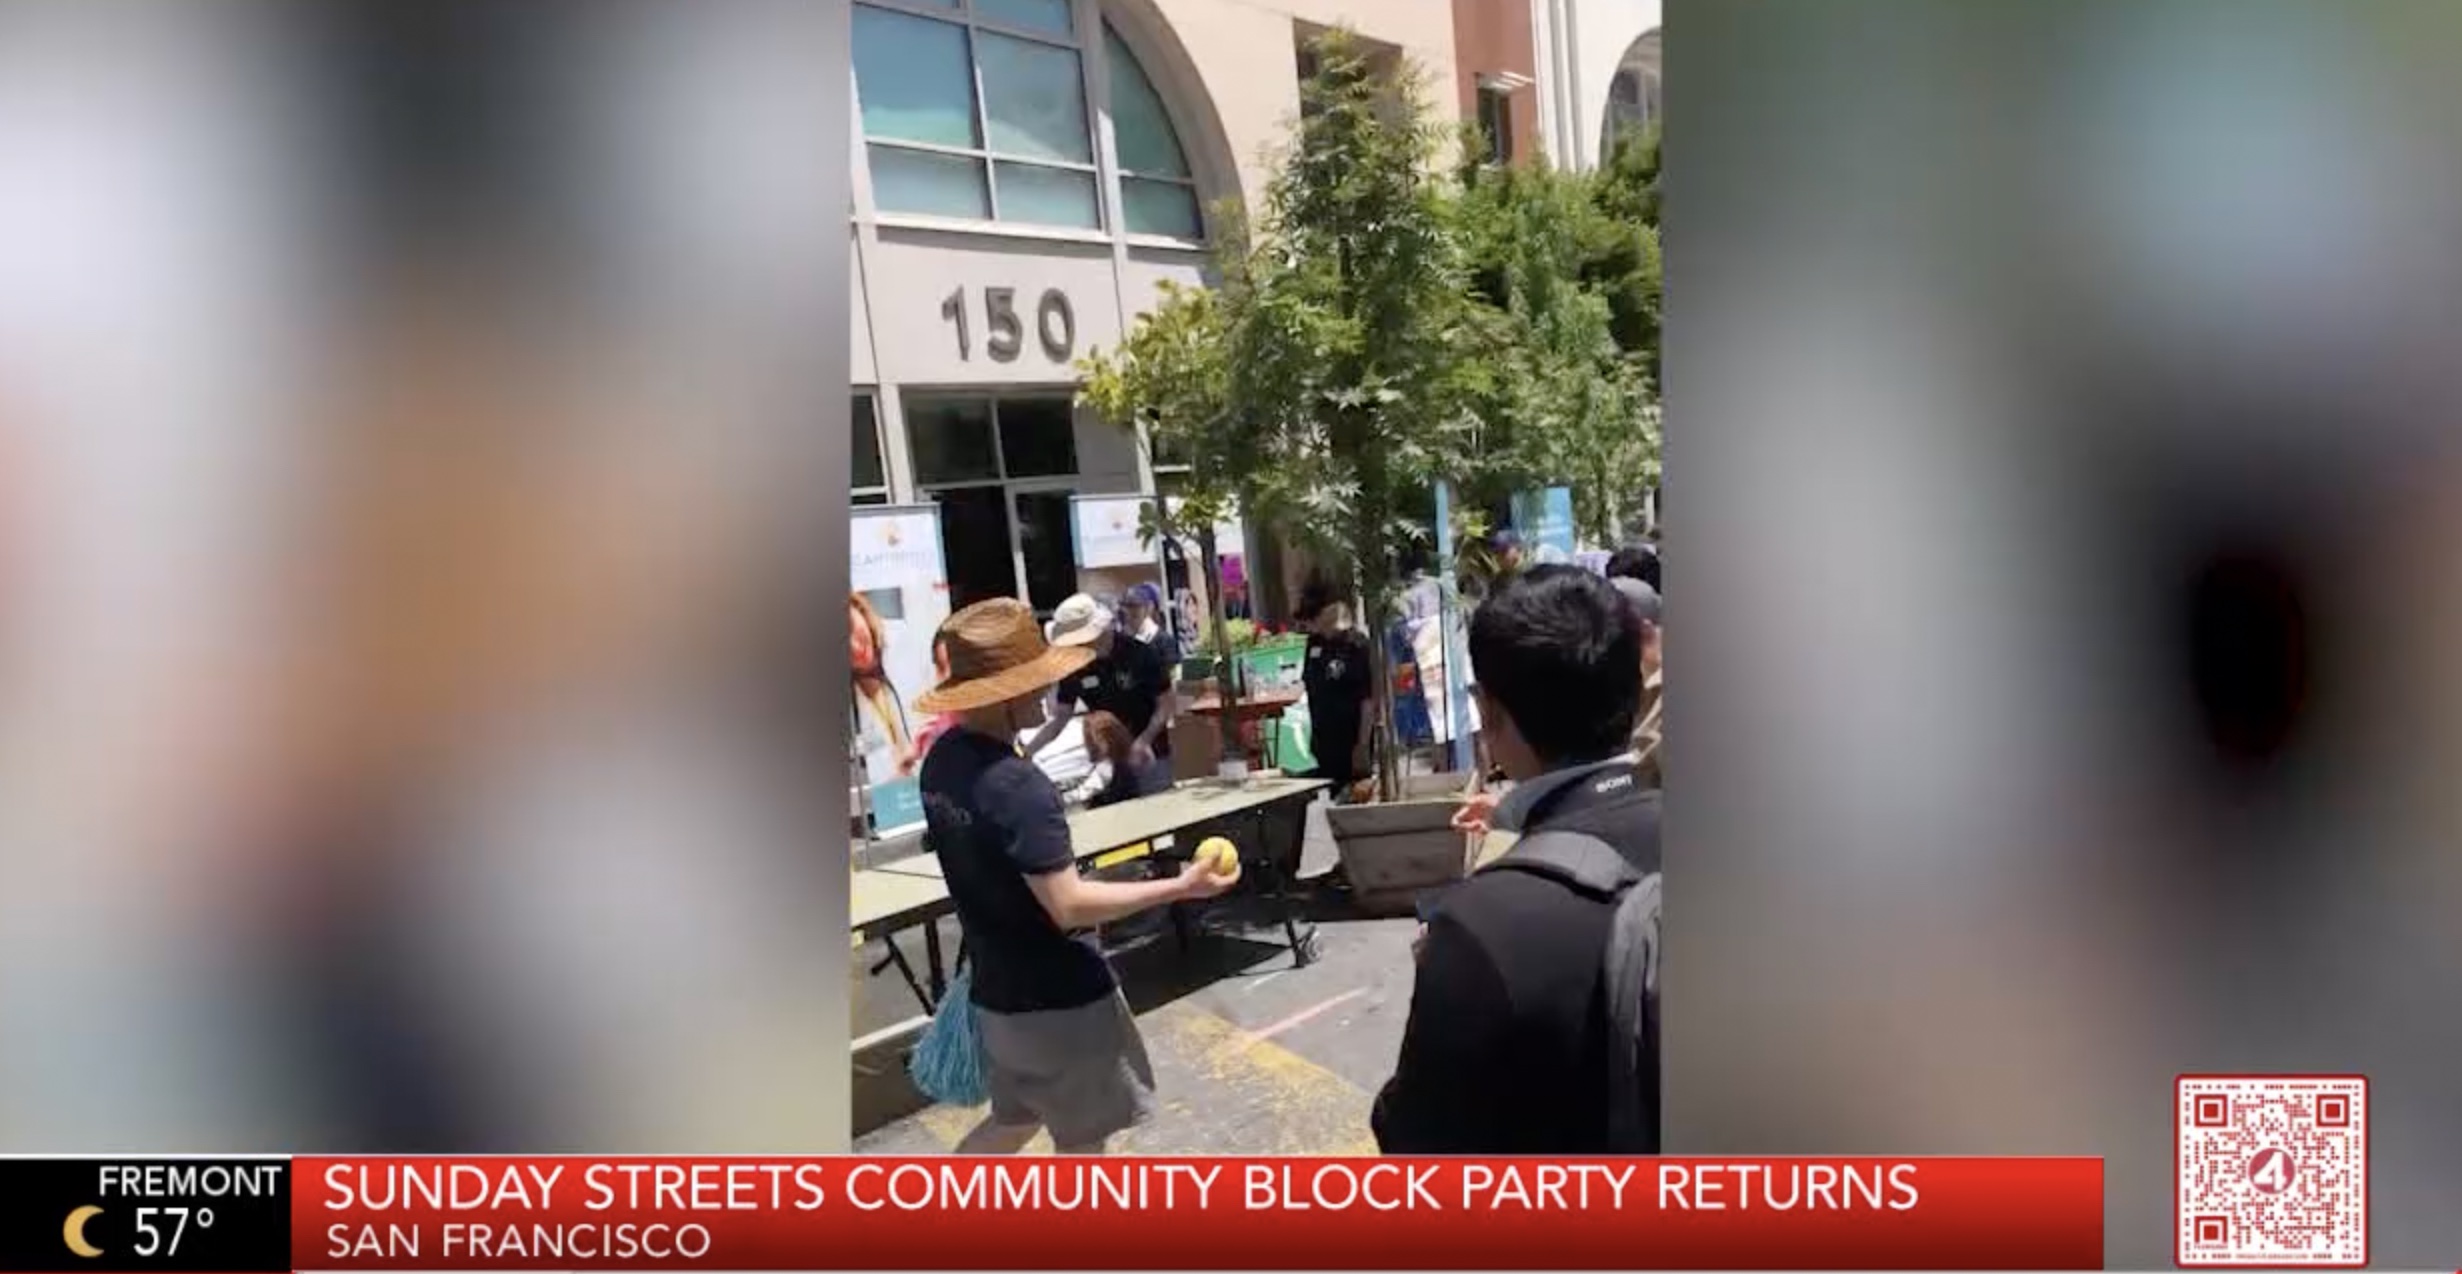 KRON4 News features Sunday Streets hosted by St. Anthony’s